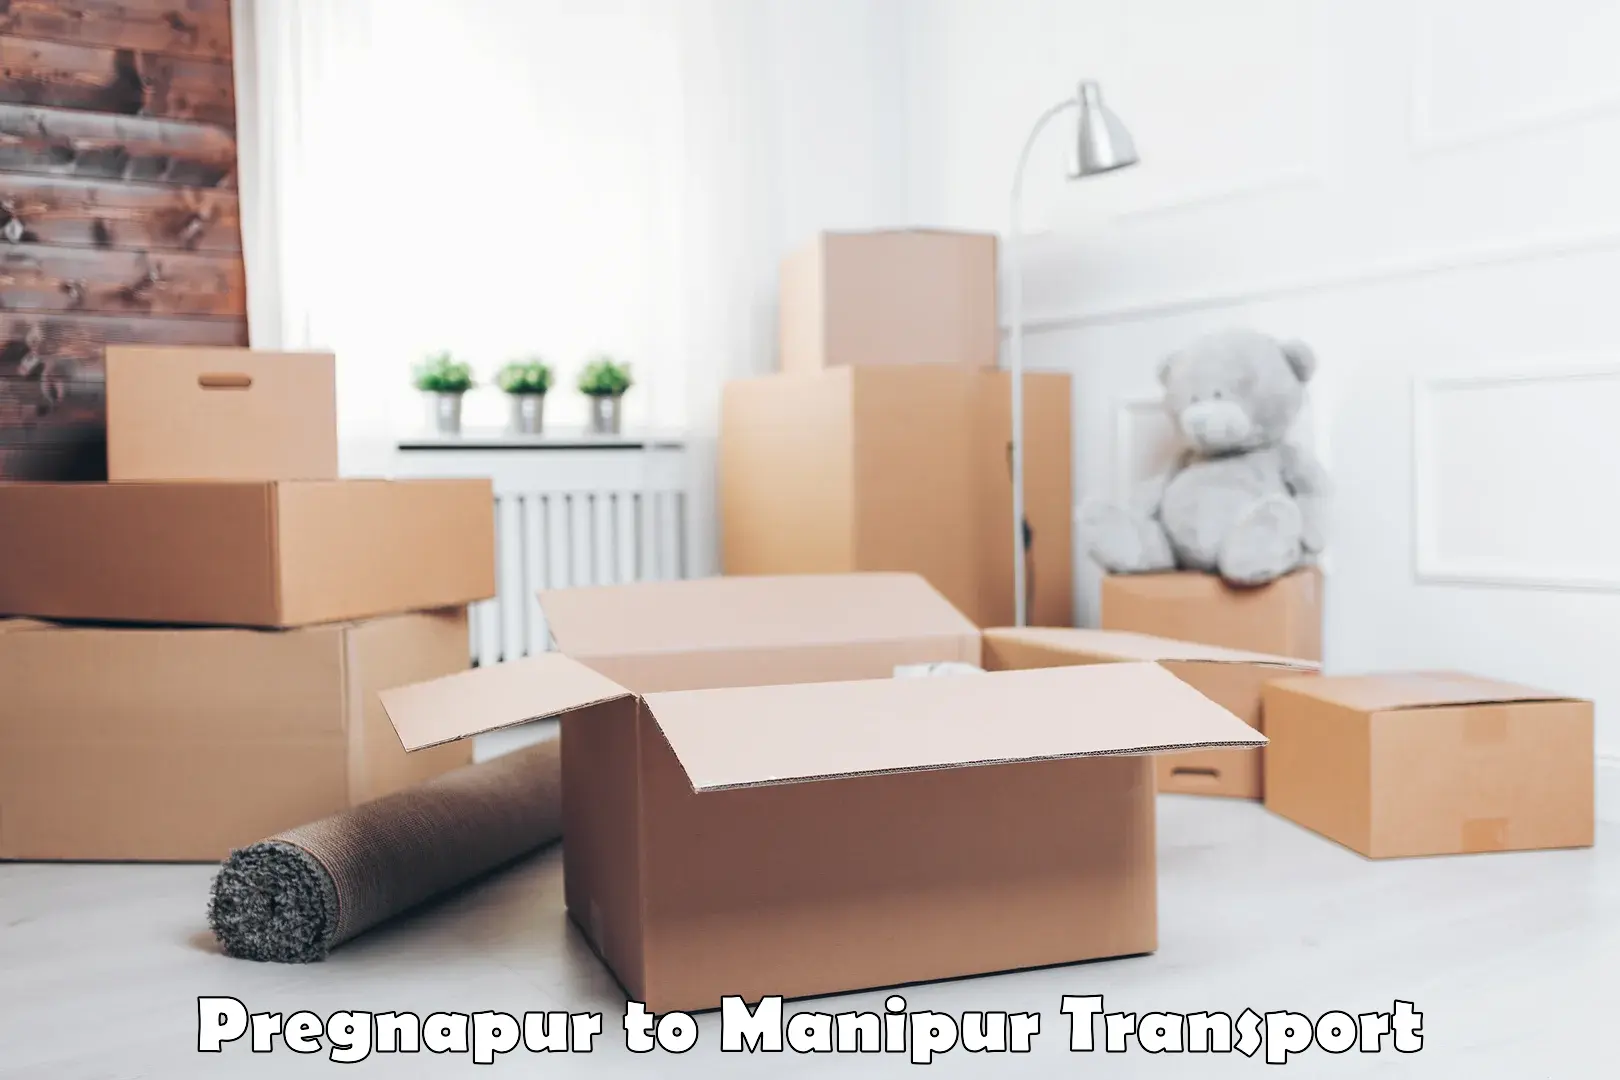 Commercial transport service Pregnapur to Manipur